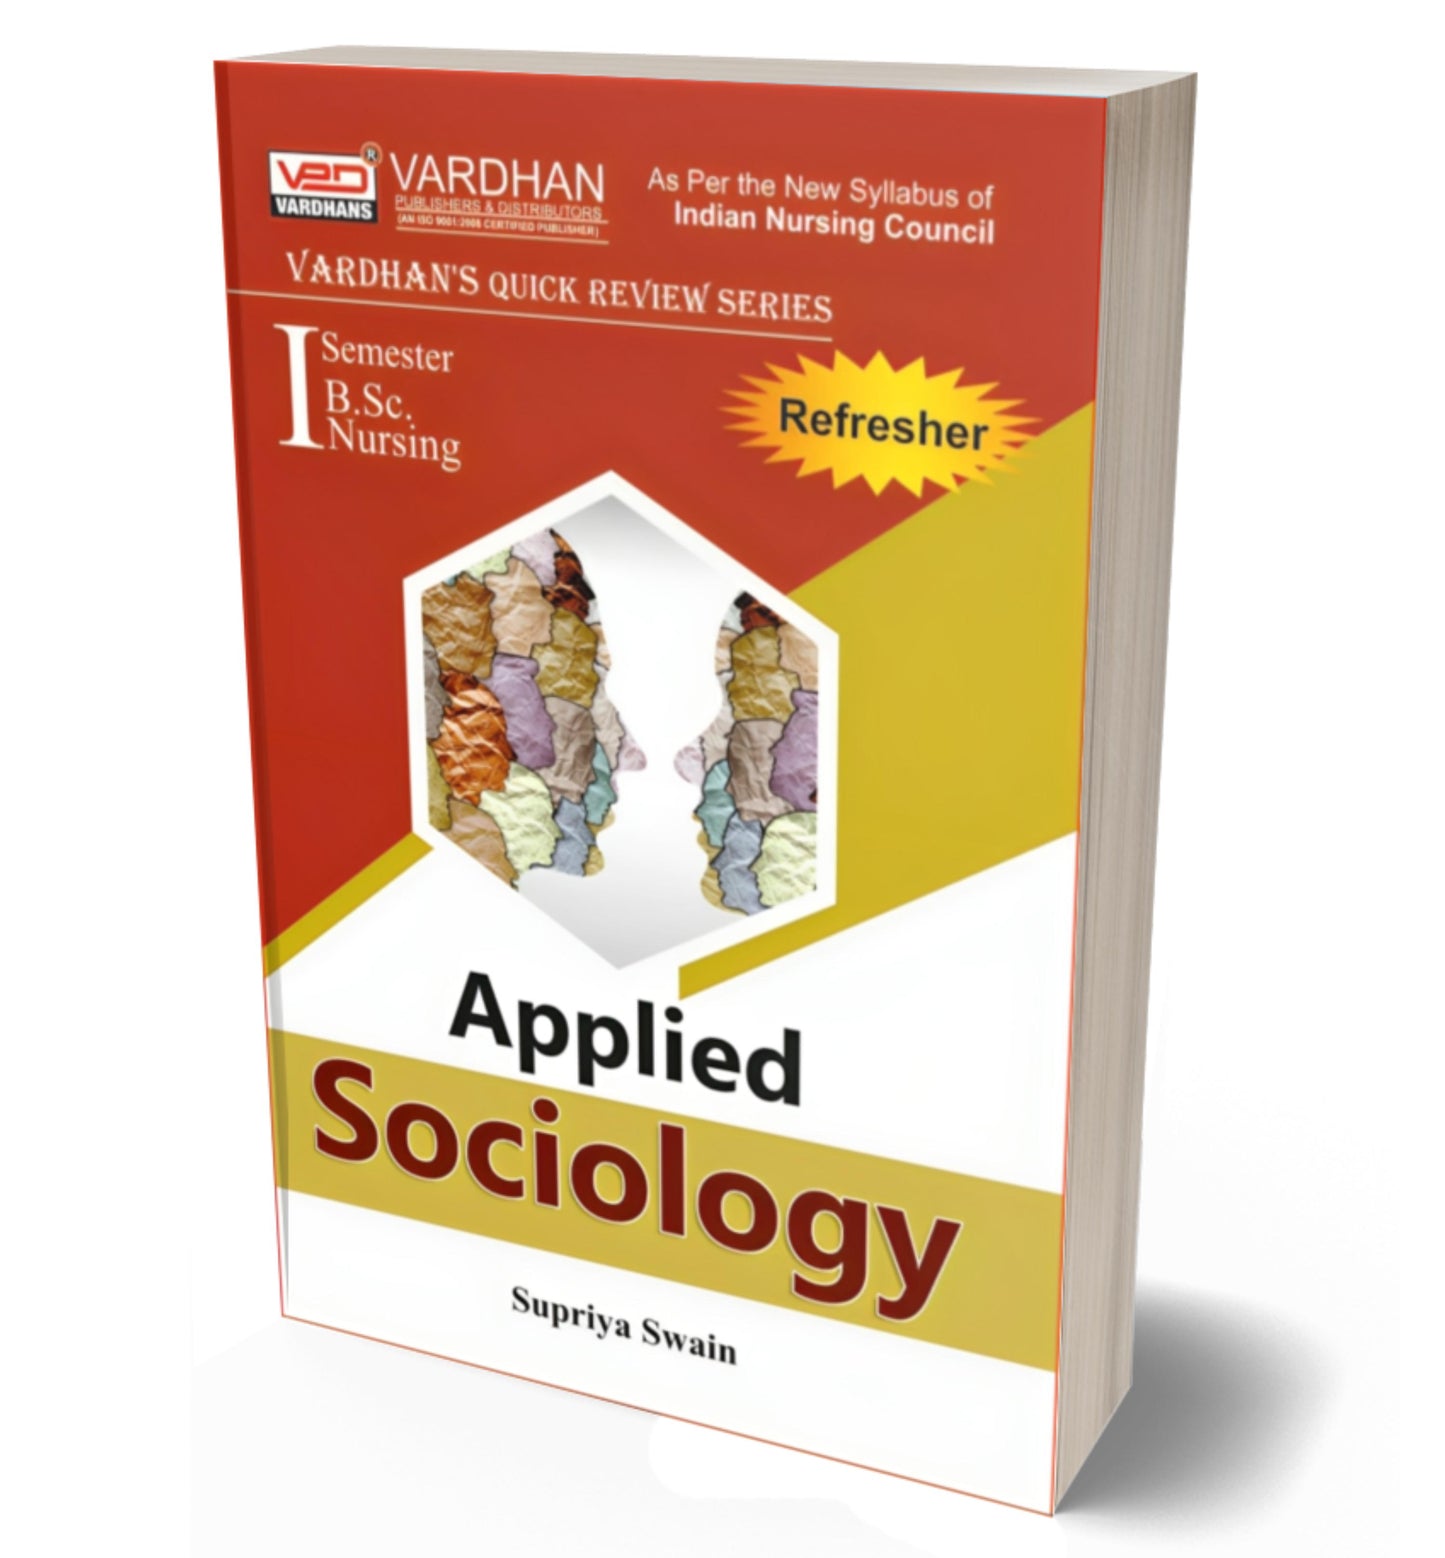 Applied Sociology (Quick Review Series)